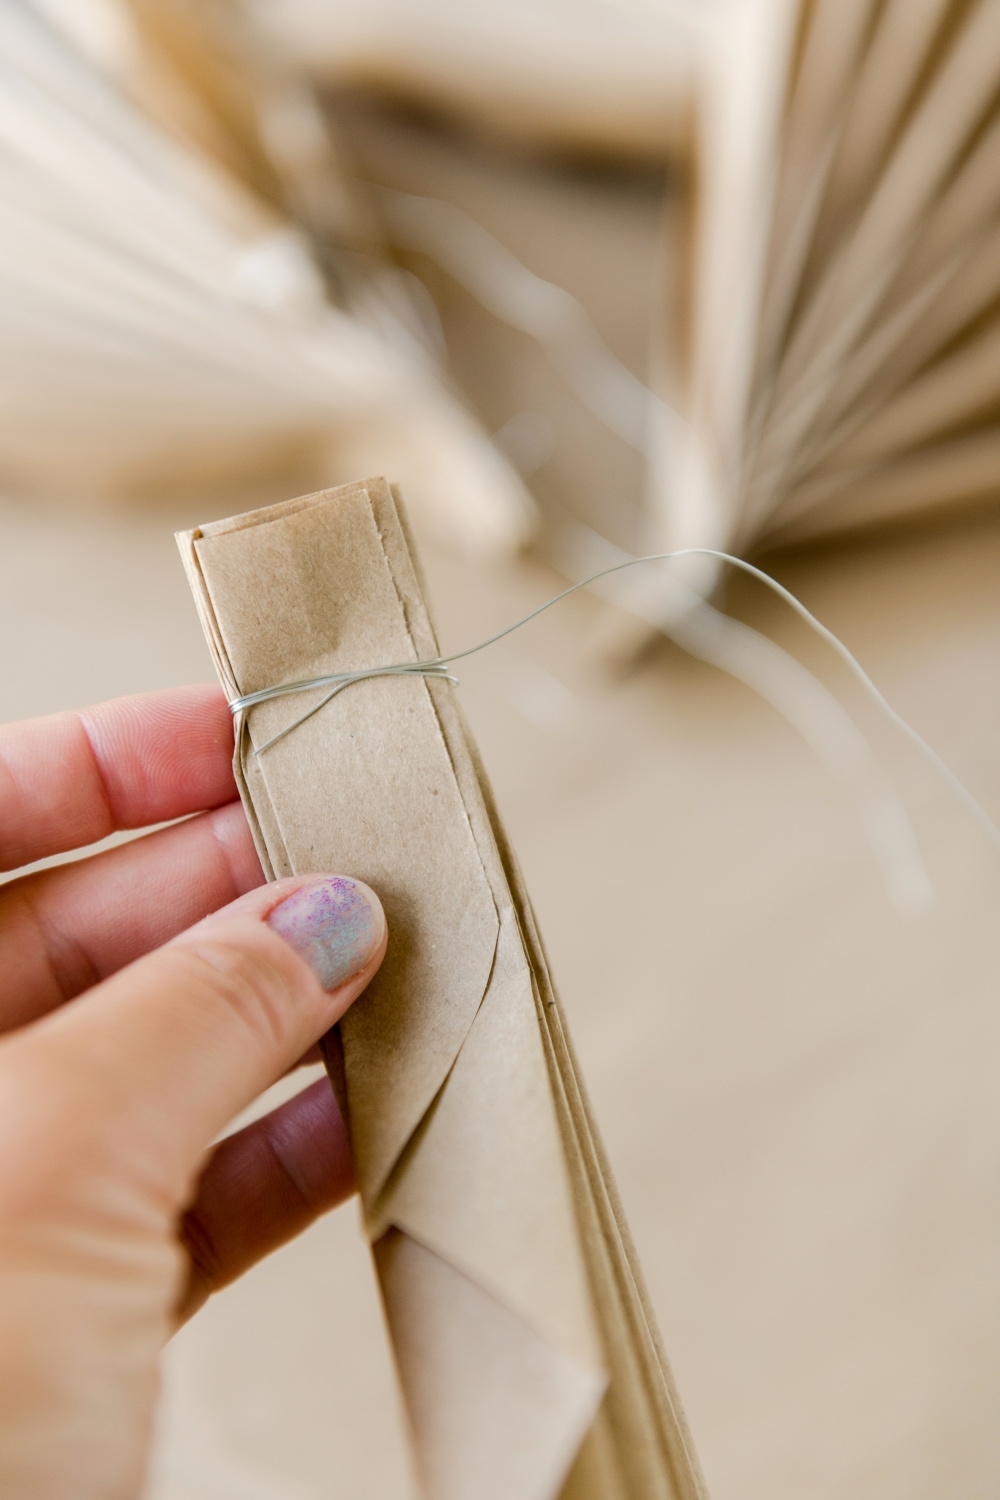 Wrap kraft paper with floral wire